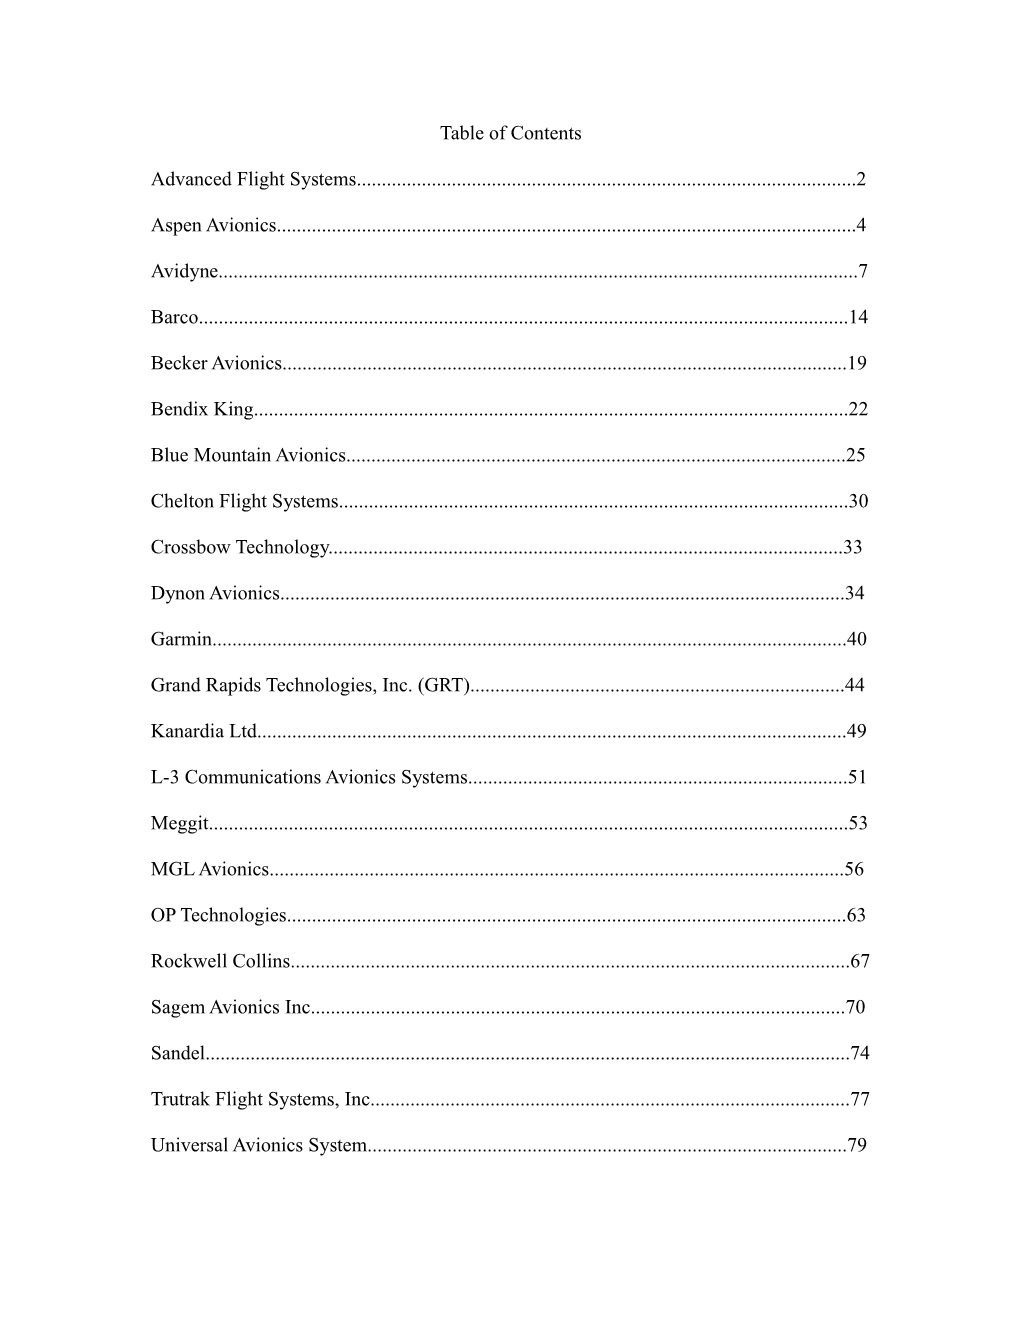 Table of Contents Advanced Flight Systems